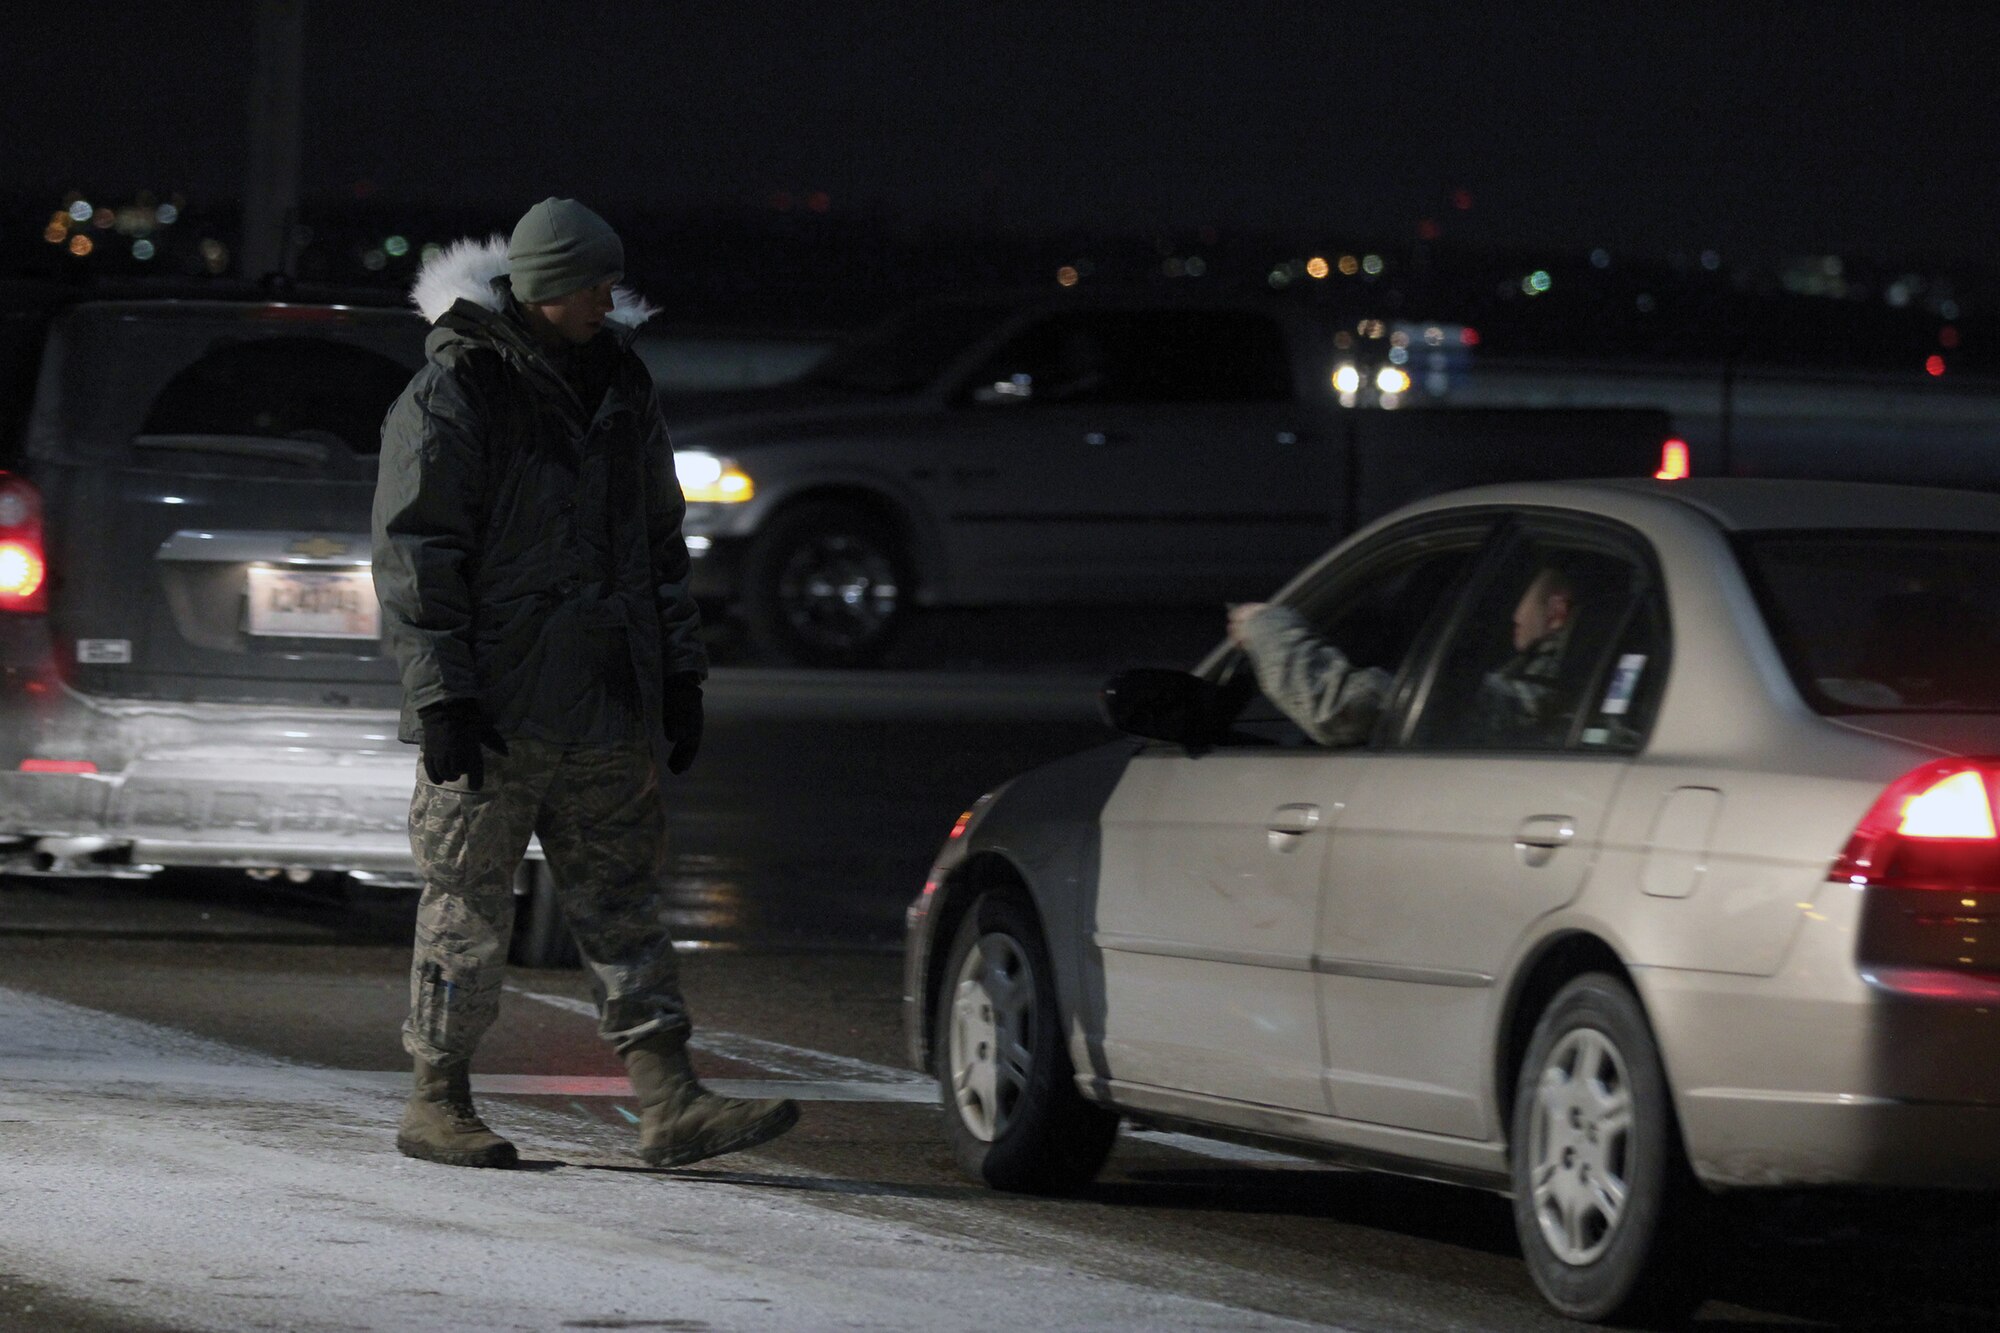 WRIGHT-PATTERSON AIR FORCE BASE, Ohio – Senior Airman Alex Stephens, 445th Security Forces Squadron, handles the flow of traffic entering Gate 26A during the Jan. 11, 2015 445th Airlift Wing unit training assembly. The temperature was 4 below zero. (U.S. Air Force photo/Tech. Sgt. Patrick O'Reilly)